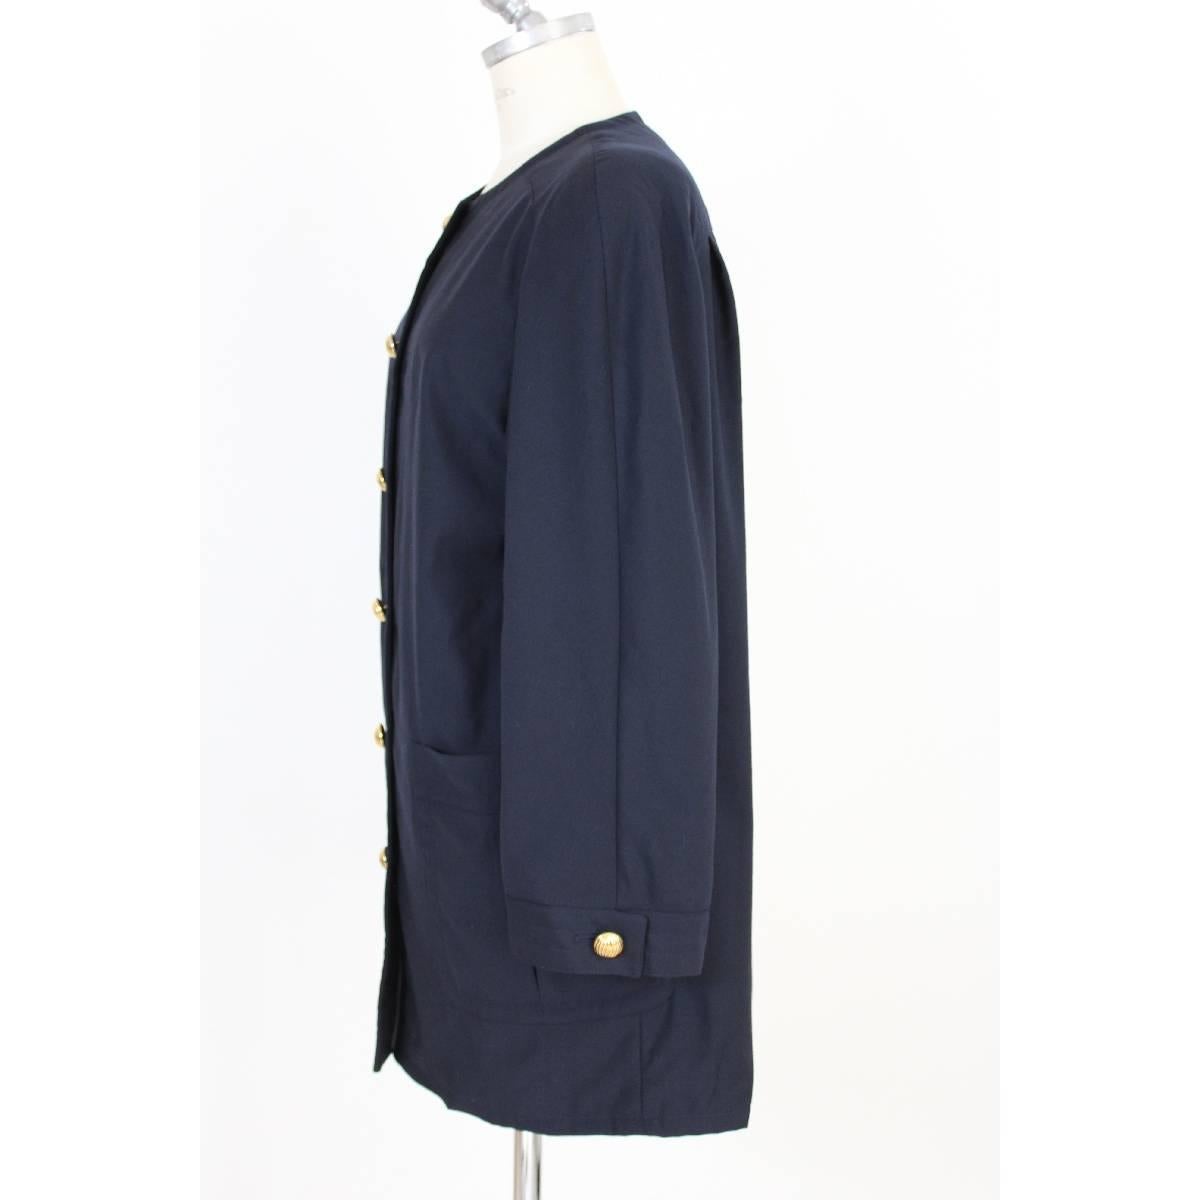 Valentino vintage cape jacket like coat 1990s women’s. Blue with golden buttons in 100% wool. Size 44 made in Italy, new without tag.

Size 44 It 10 Us 12 Uk

Shoulders: 46 cm
Chest / Bust: 65 cm
Sleeves: 60 cm
Length: 85 cm

Color: